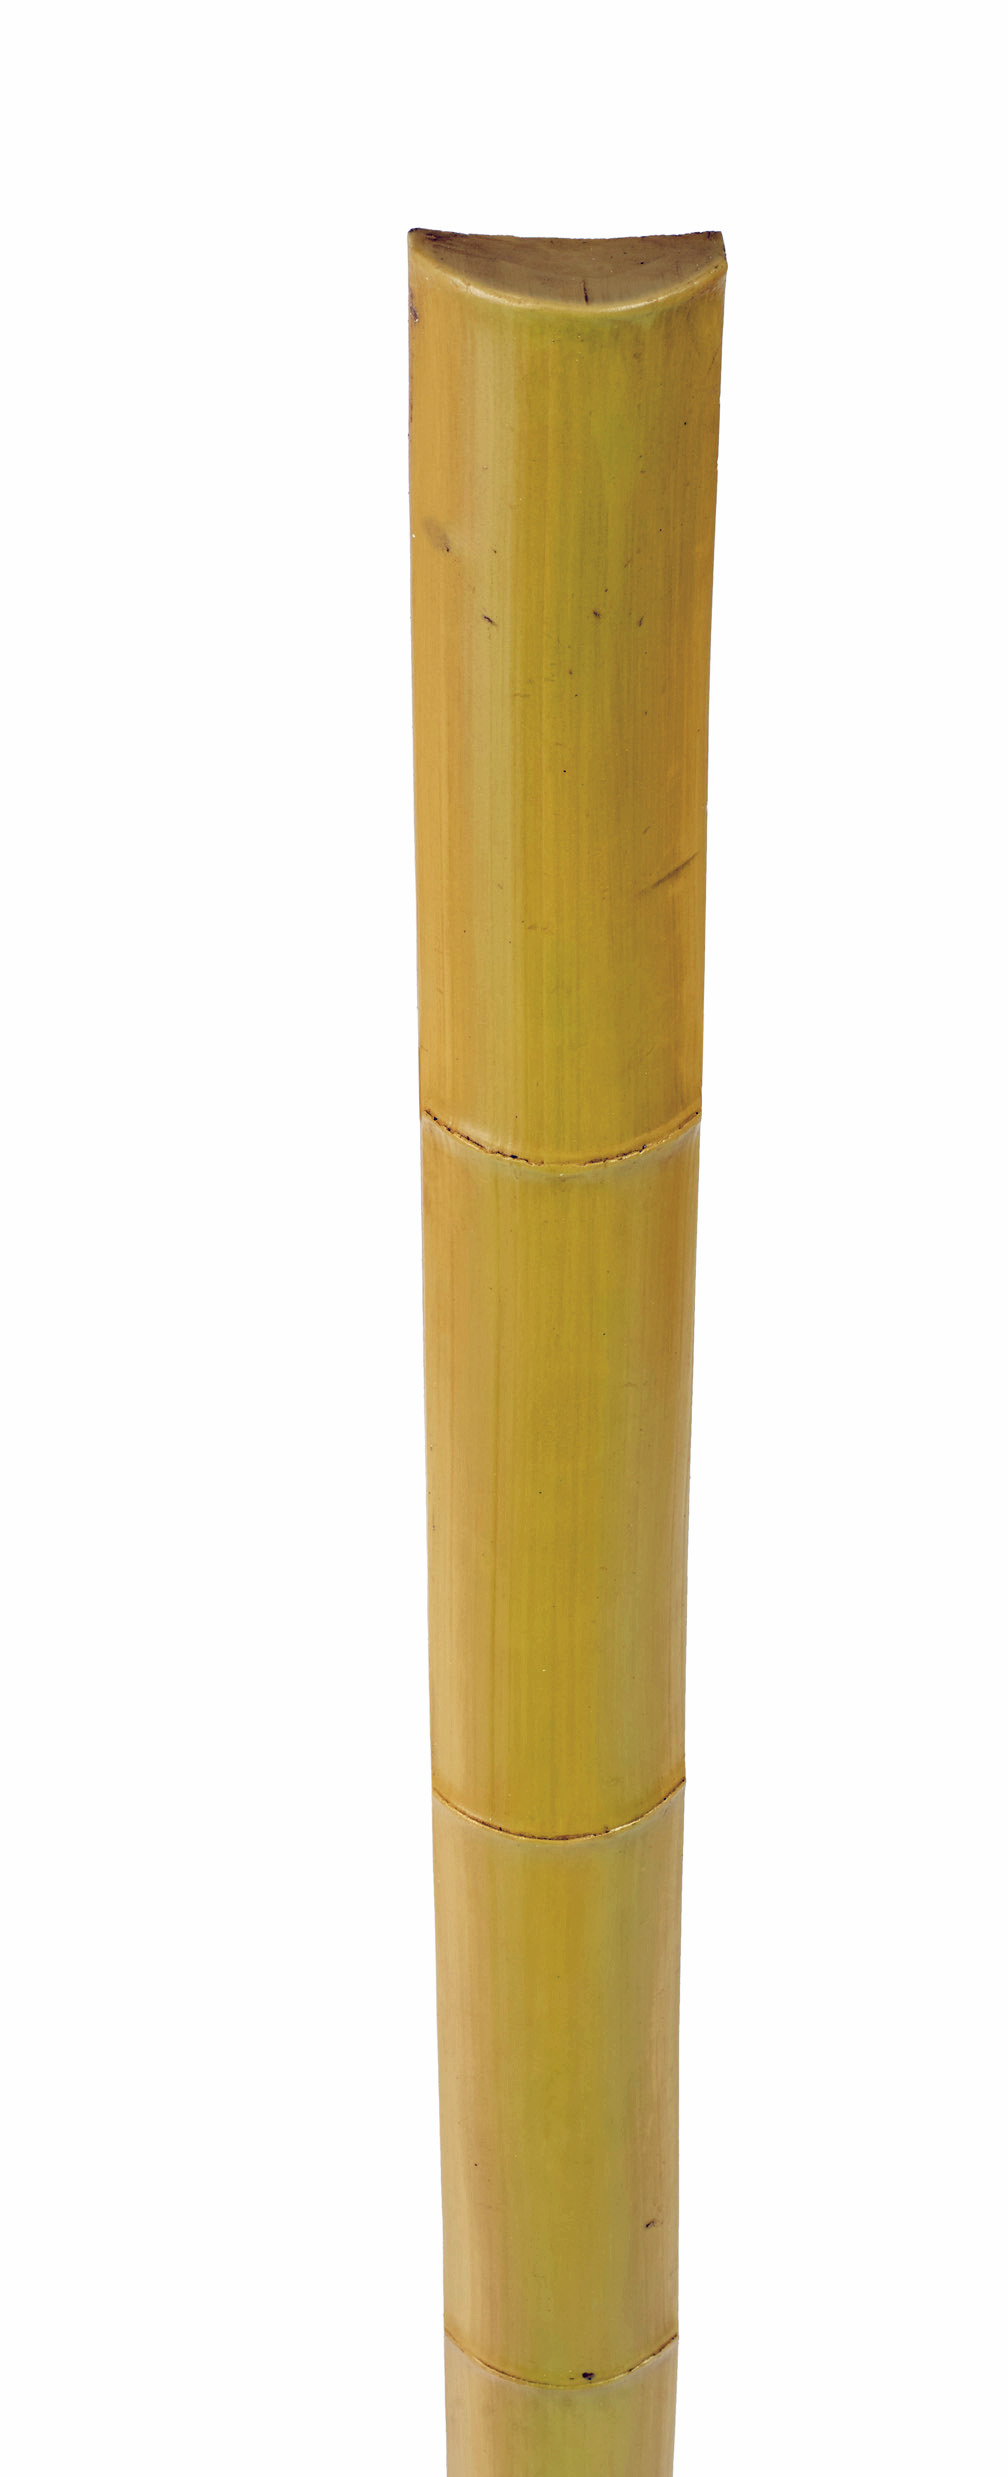 Bamboo Moulding - Young